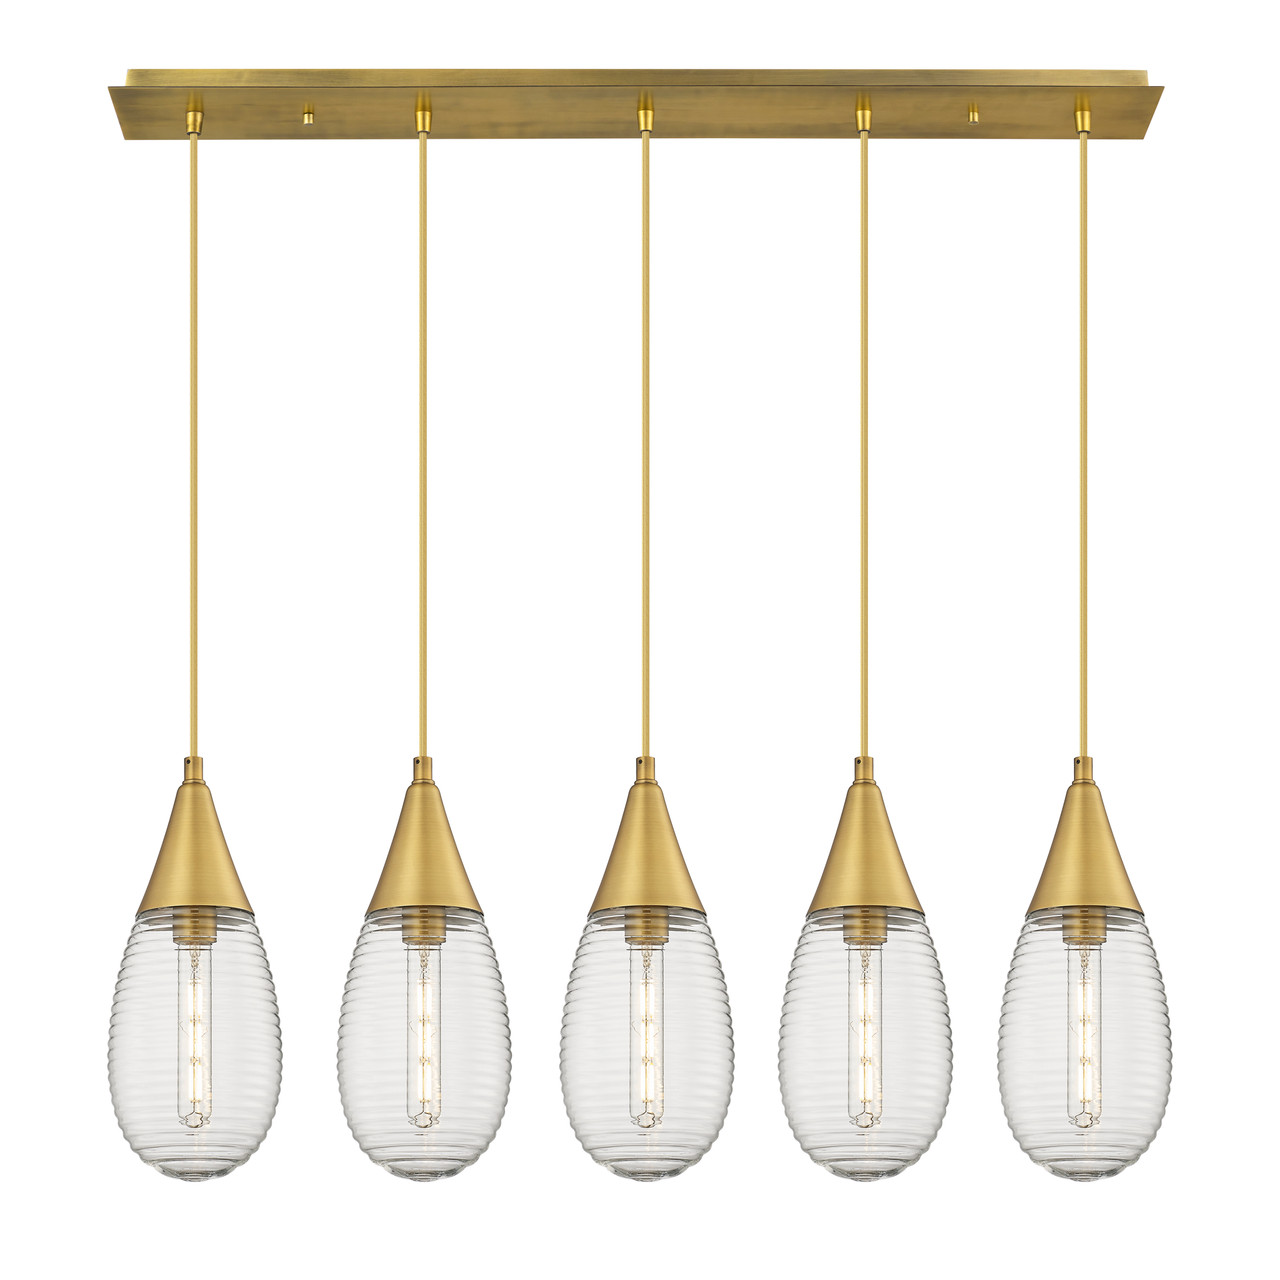 INNOVATIONS 125-450-1P-BB-G450-6SCL Malone 7 Light 38 inch Linear Pendant Brushed Brass